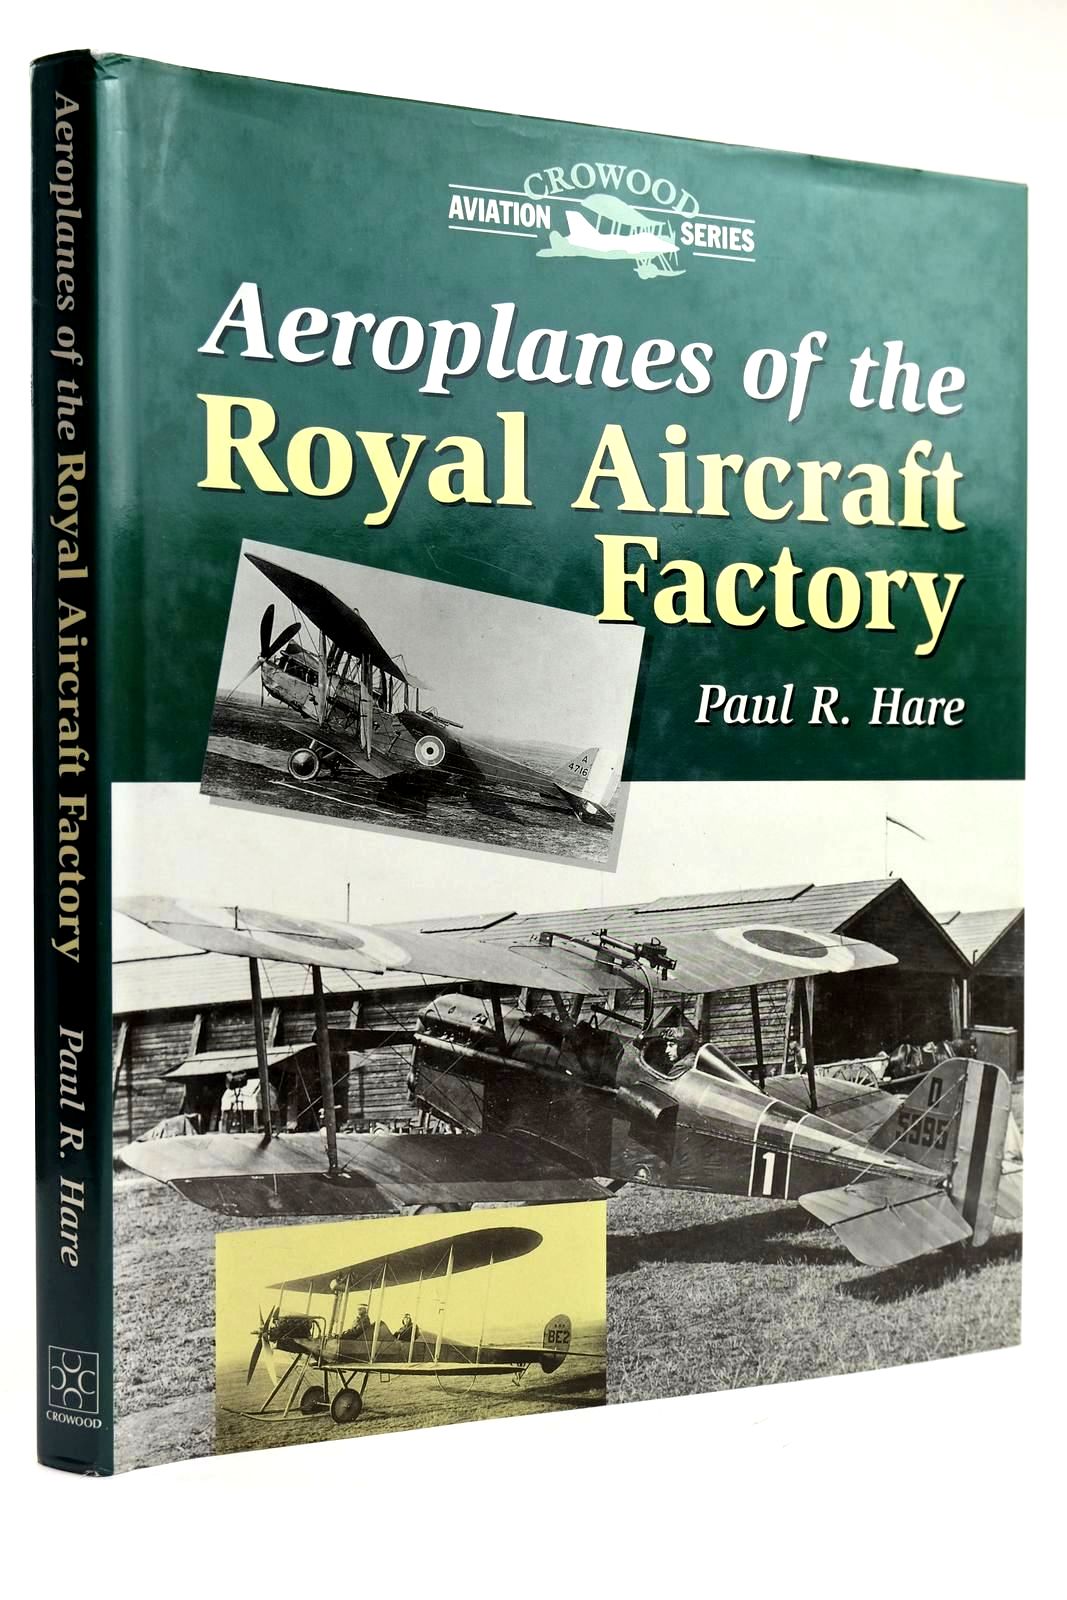 Photo of AEROPLANES OF THE ROYAL AIRCRAFT FACTORY written by Hare, Paul R. published by The Crowood Press (STOCK CODE: 2132029)  for sale by Stella & Rose's Books